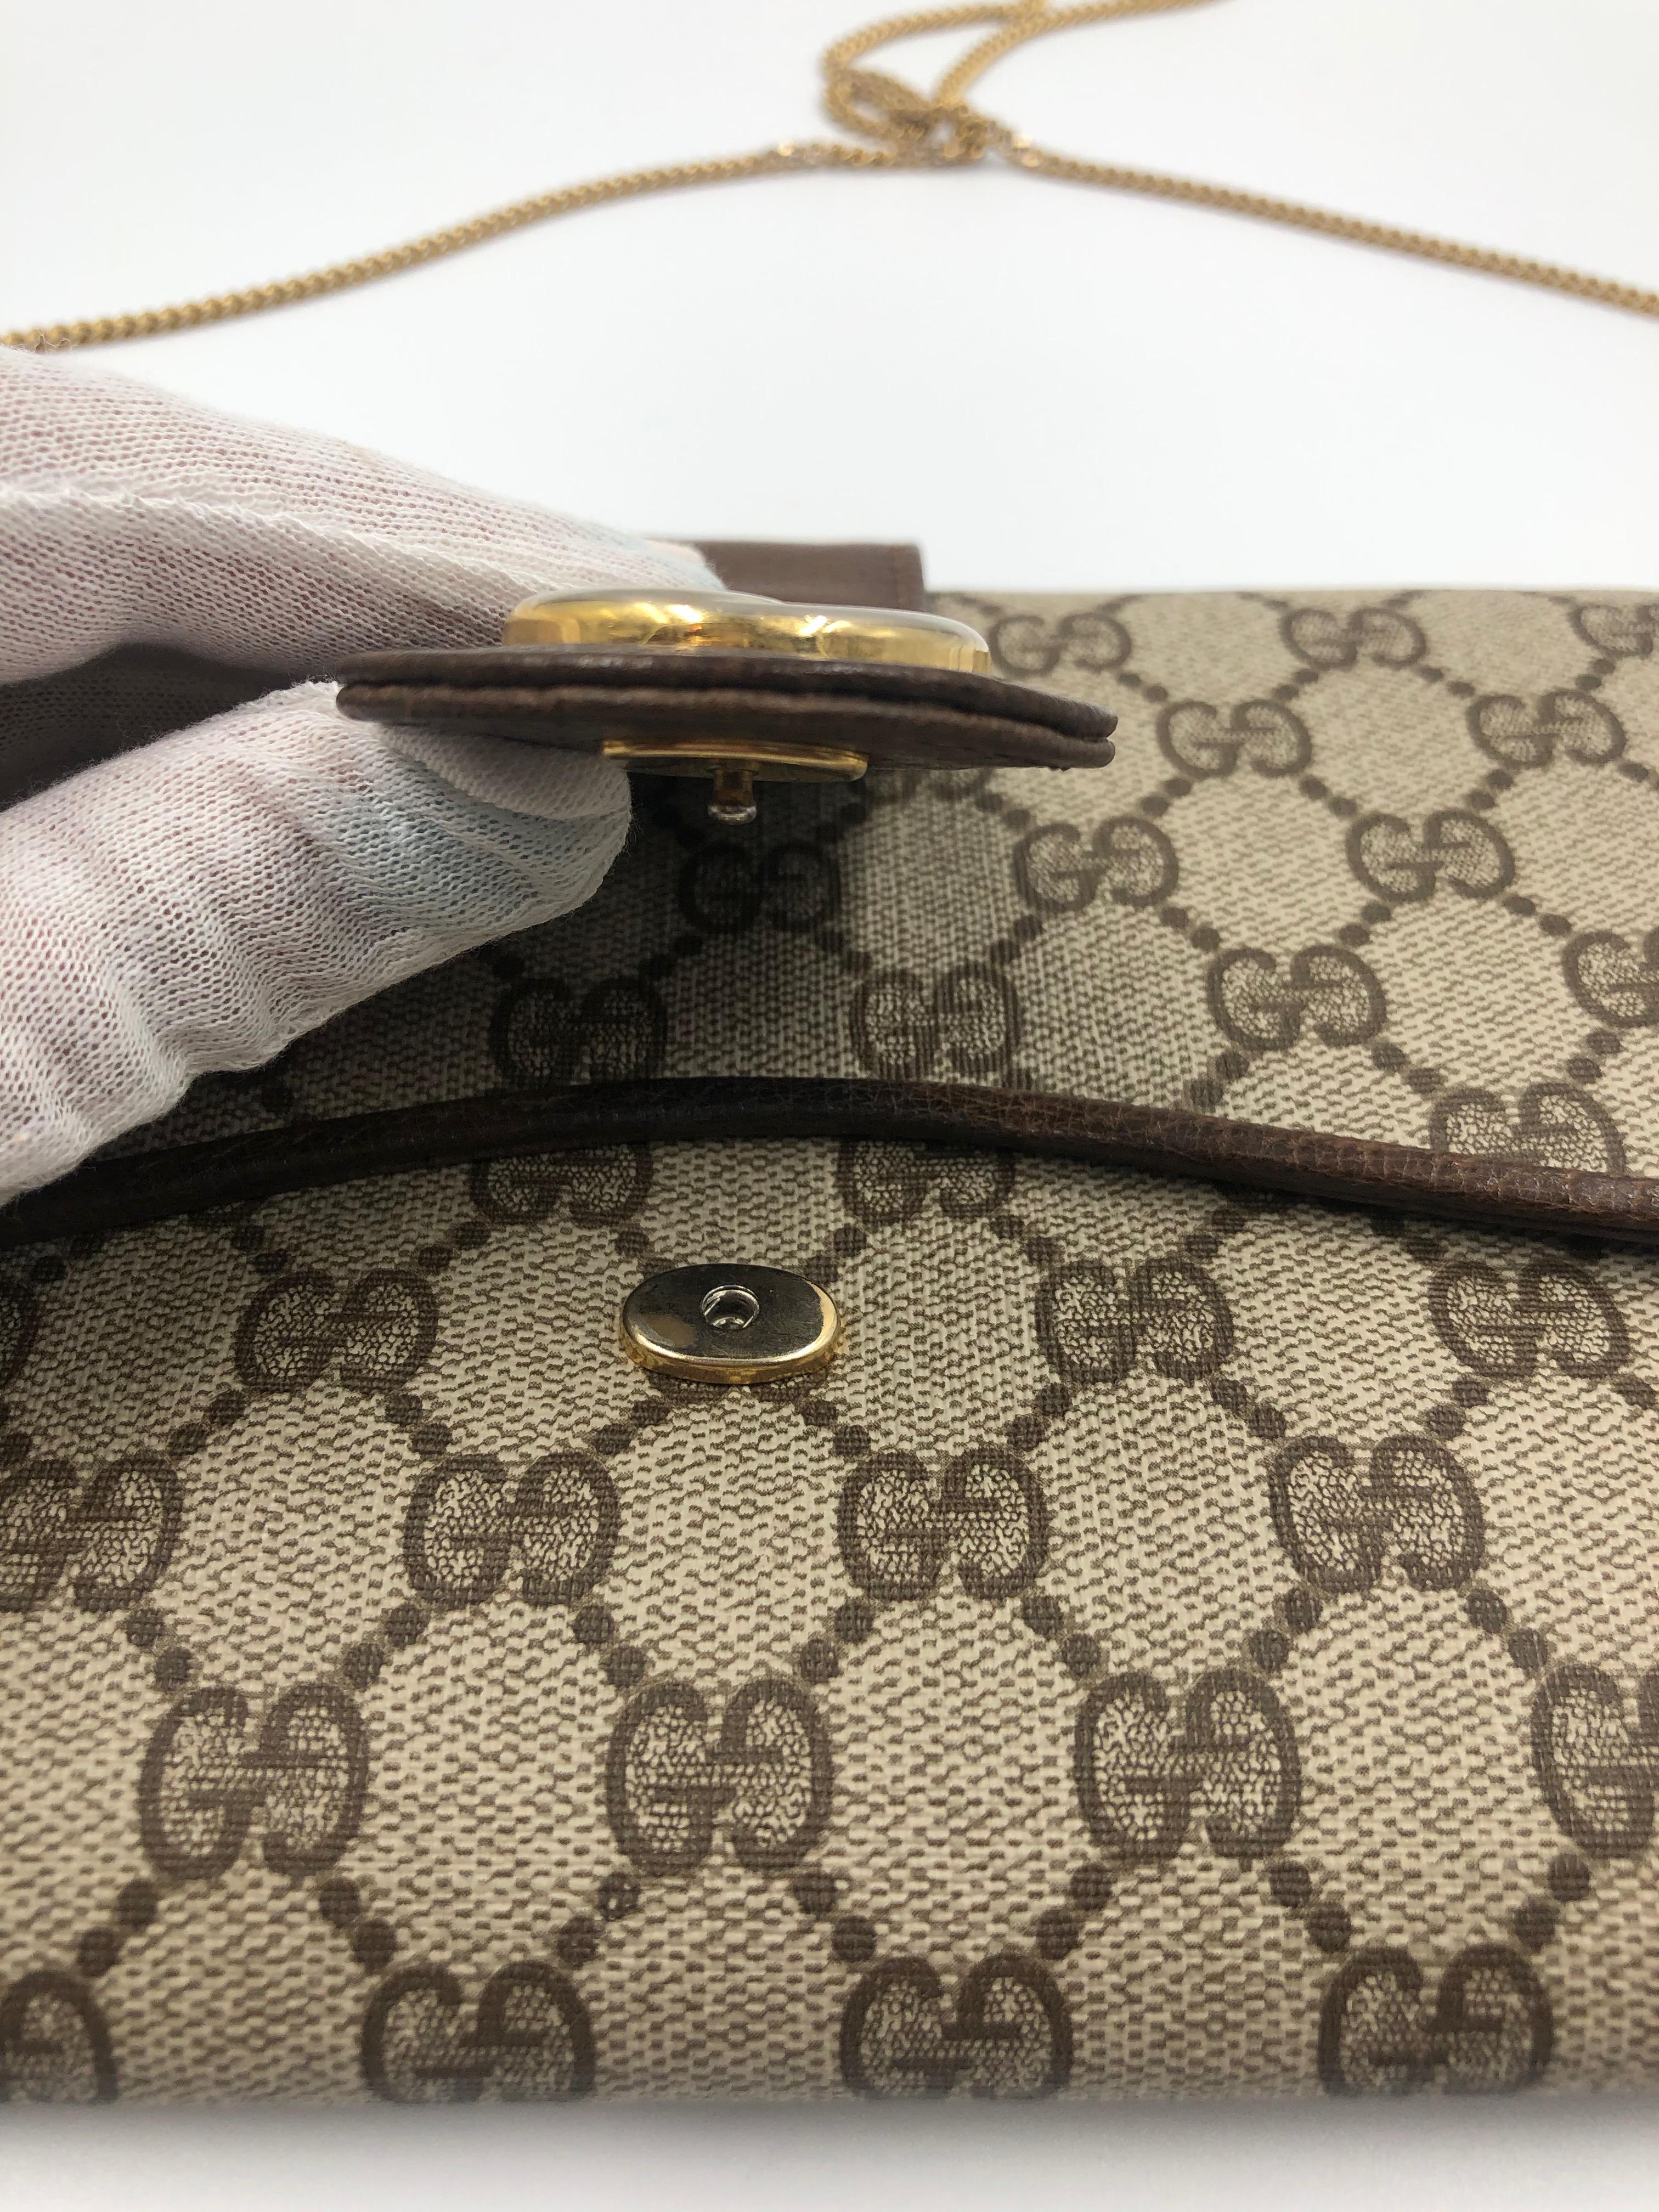 Gucci Vintage GG Logo Crossbody Bag with Gold Chain 5